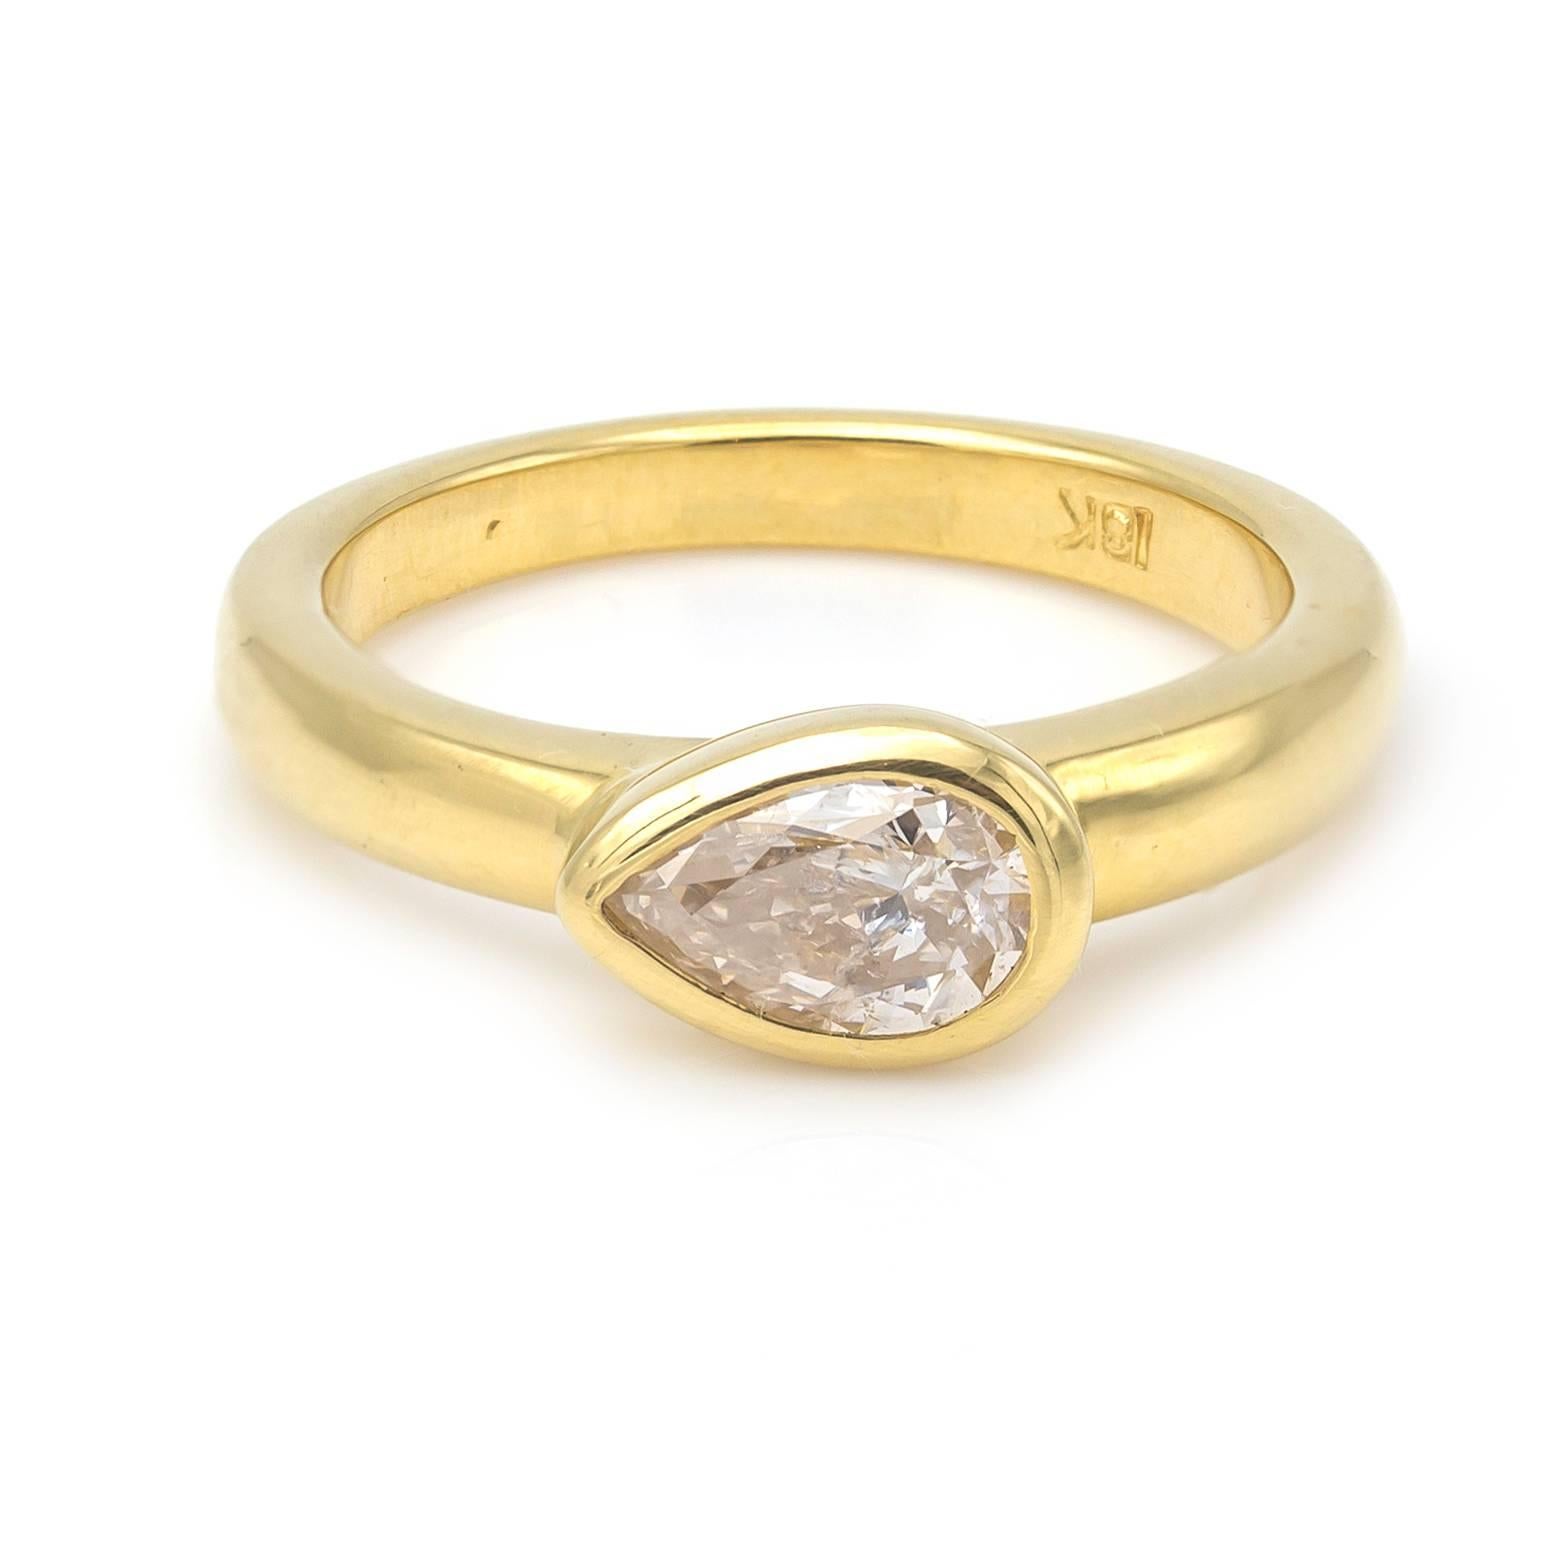 This stunning and classic diamond ring is set in 18K yellow gold and the diamond size is approx. 0.62 carats. The side setting of the tear drop diamond is elegant and artistic as it sings of individuality and is made to perfection in a traditional